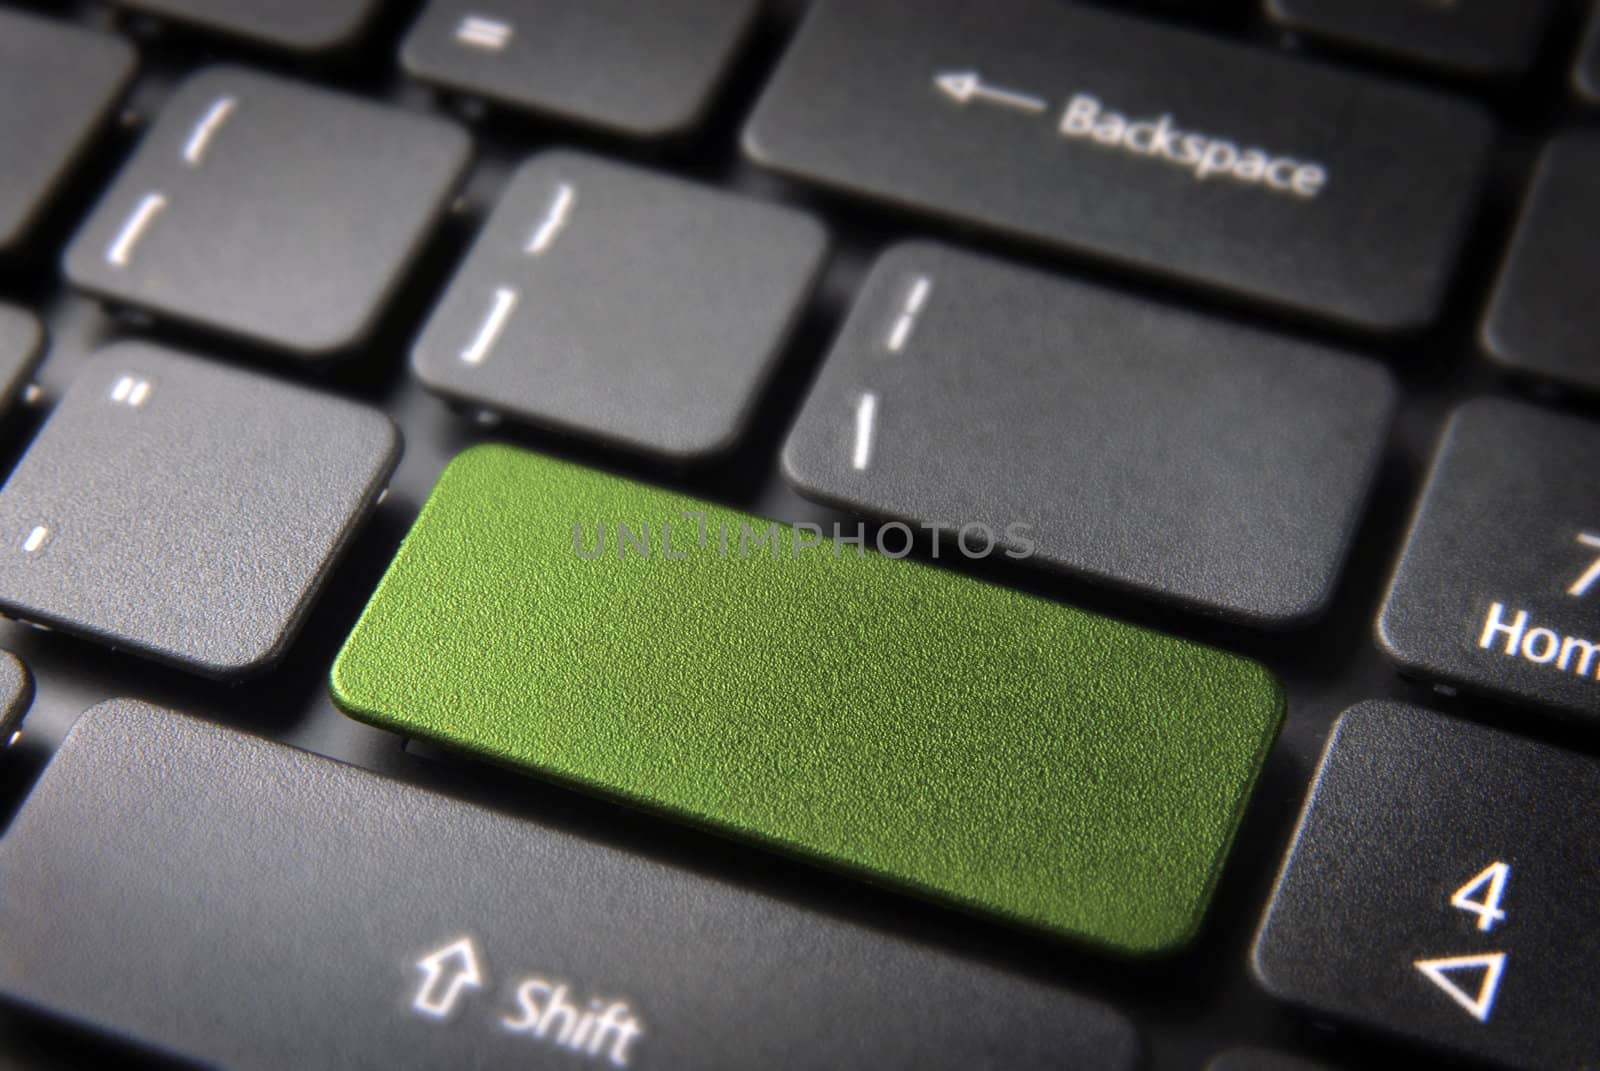 Green key on laptop keyboard with blank space. Included clipping path, so you can easily edit it and include your own color, text or icon.